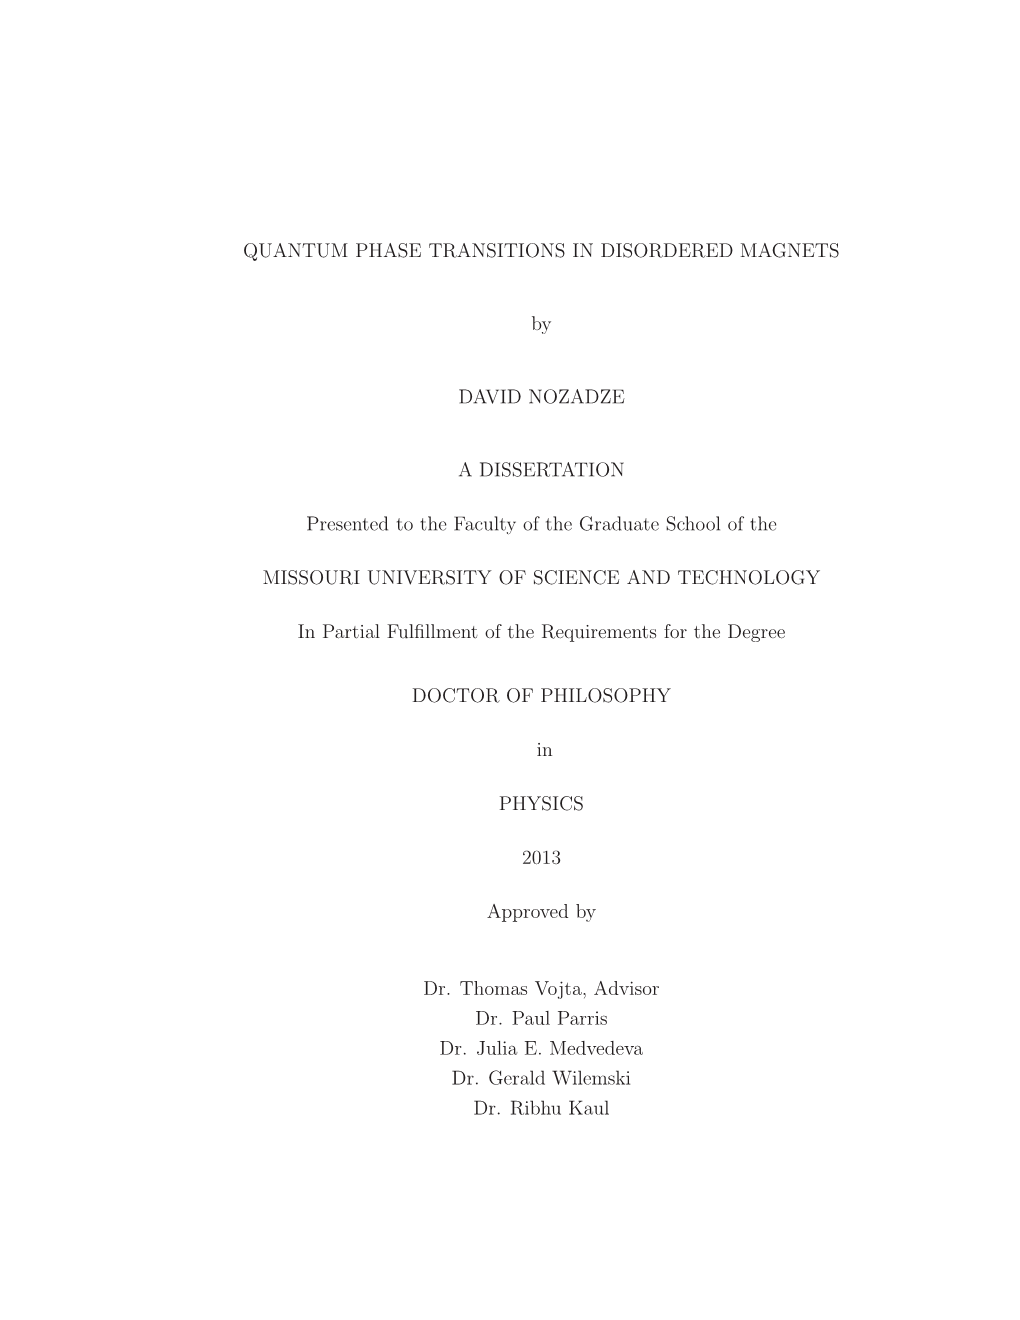 QUANTUM PHASE TRANSITIONS in DISORDERED MAGNETS by DAVID NOZADZE a DISSERTATION Presented to the Faculty of the Graduate School